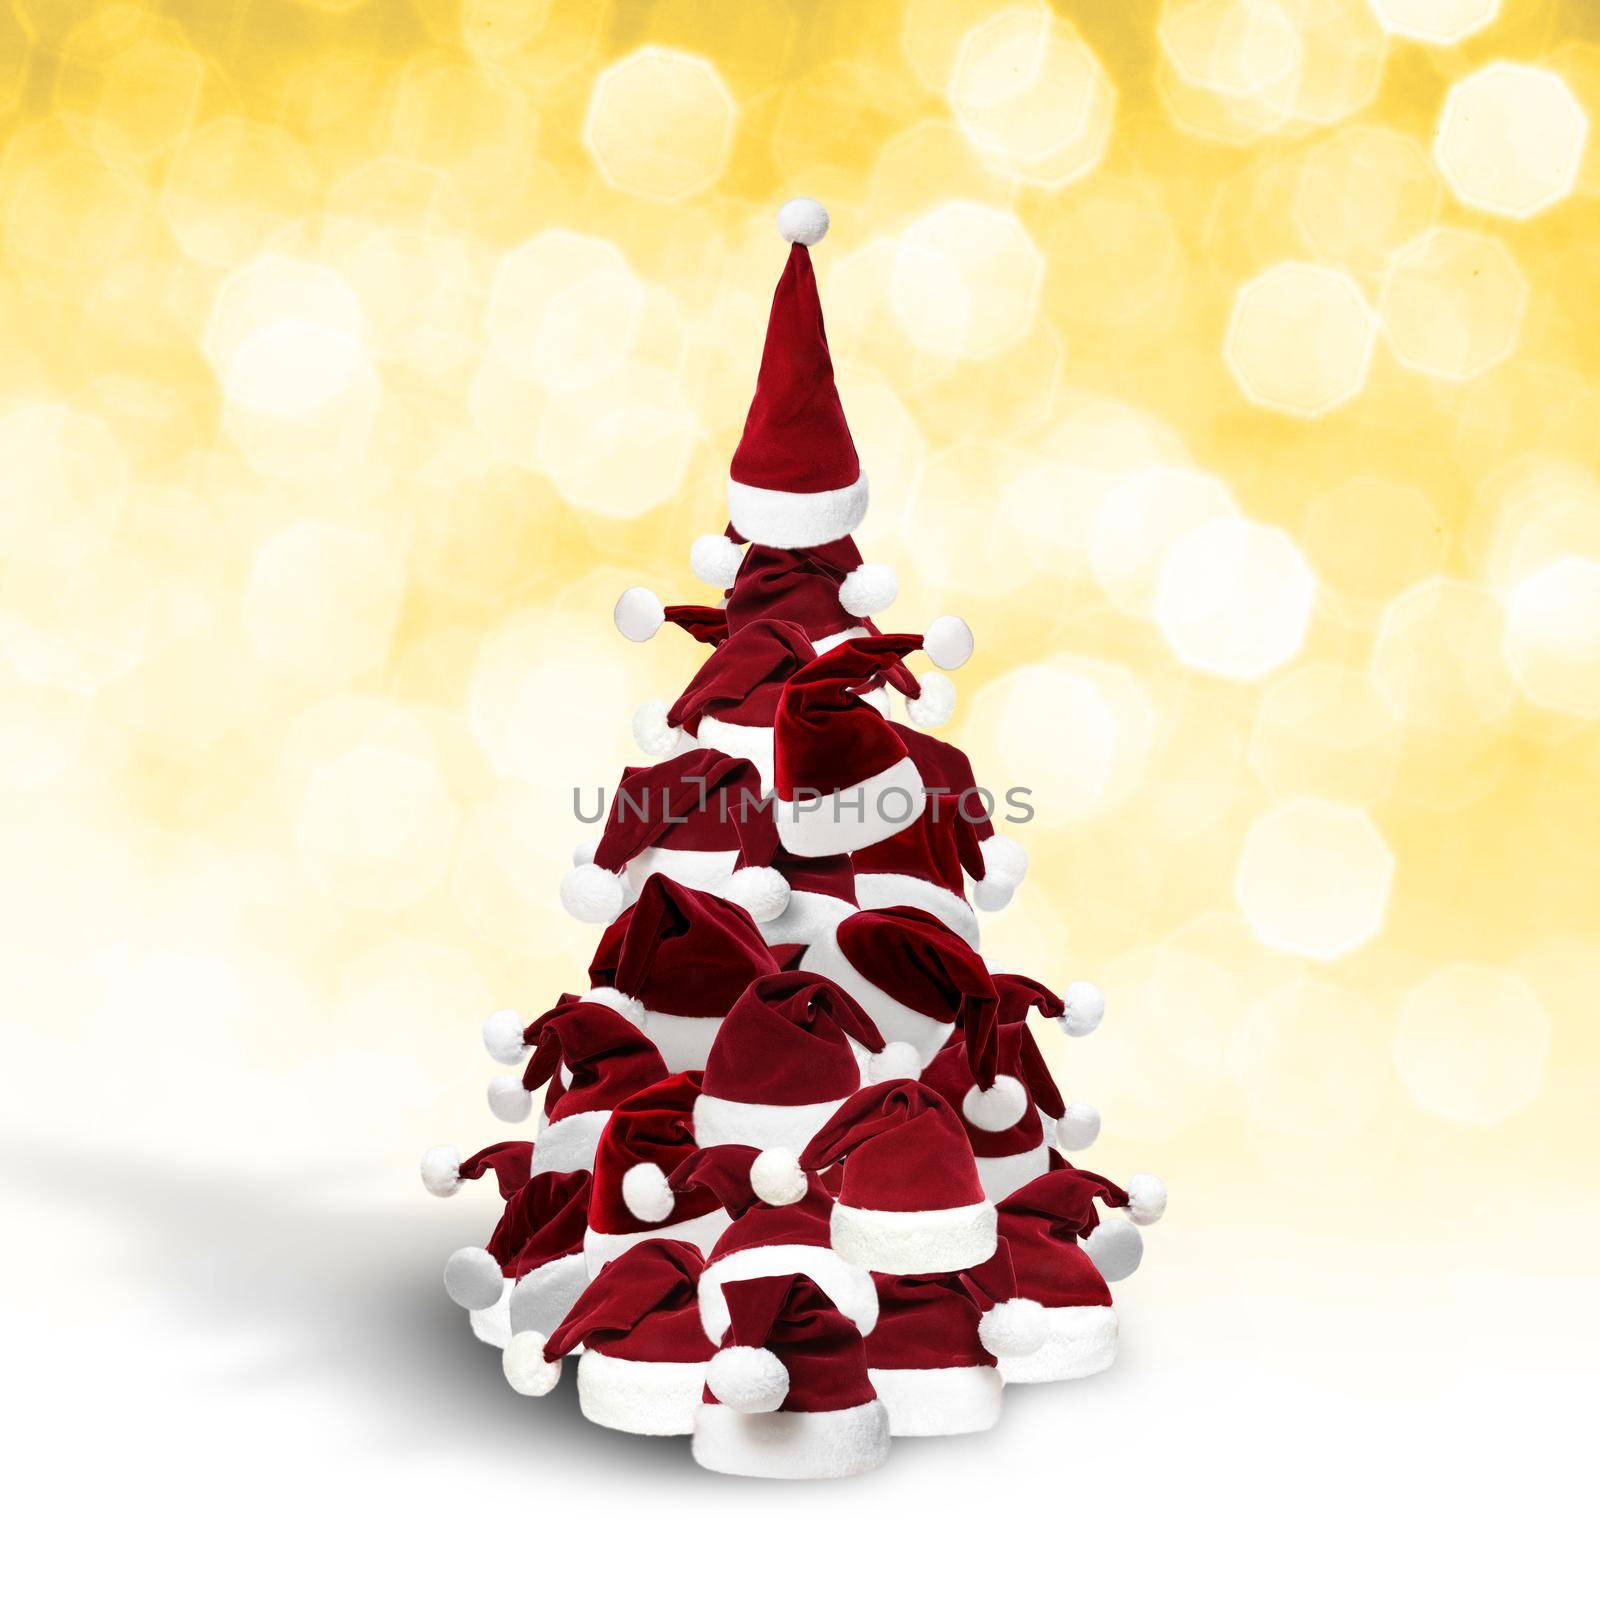 Merry Christmas concept with christmas tree and christmas hats by Taut